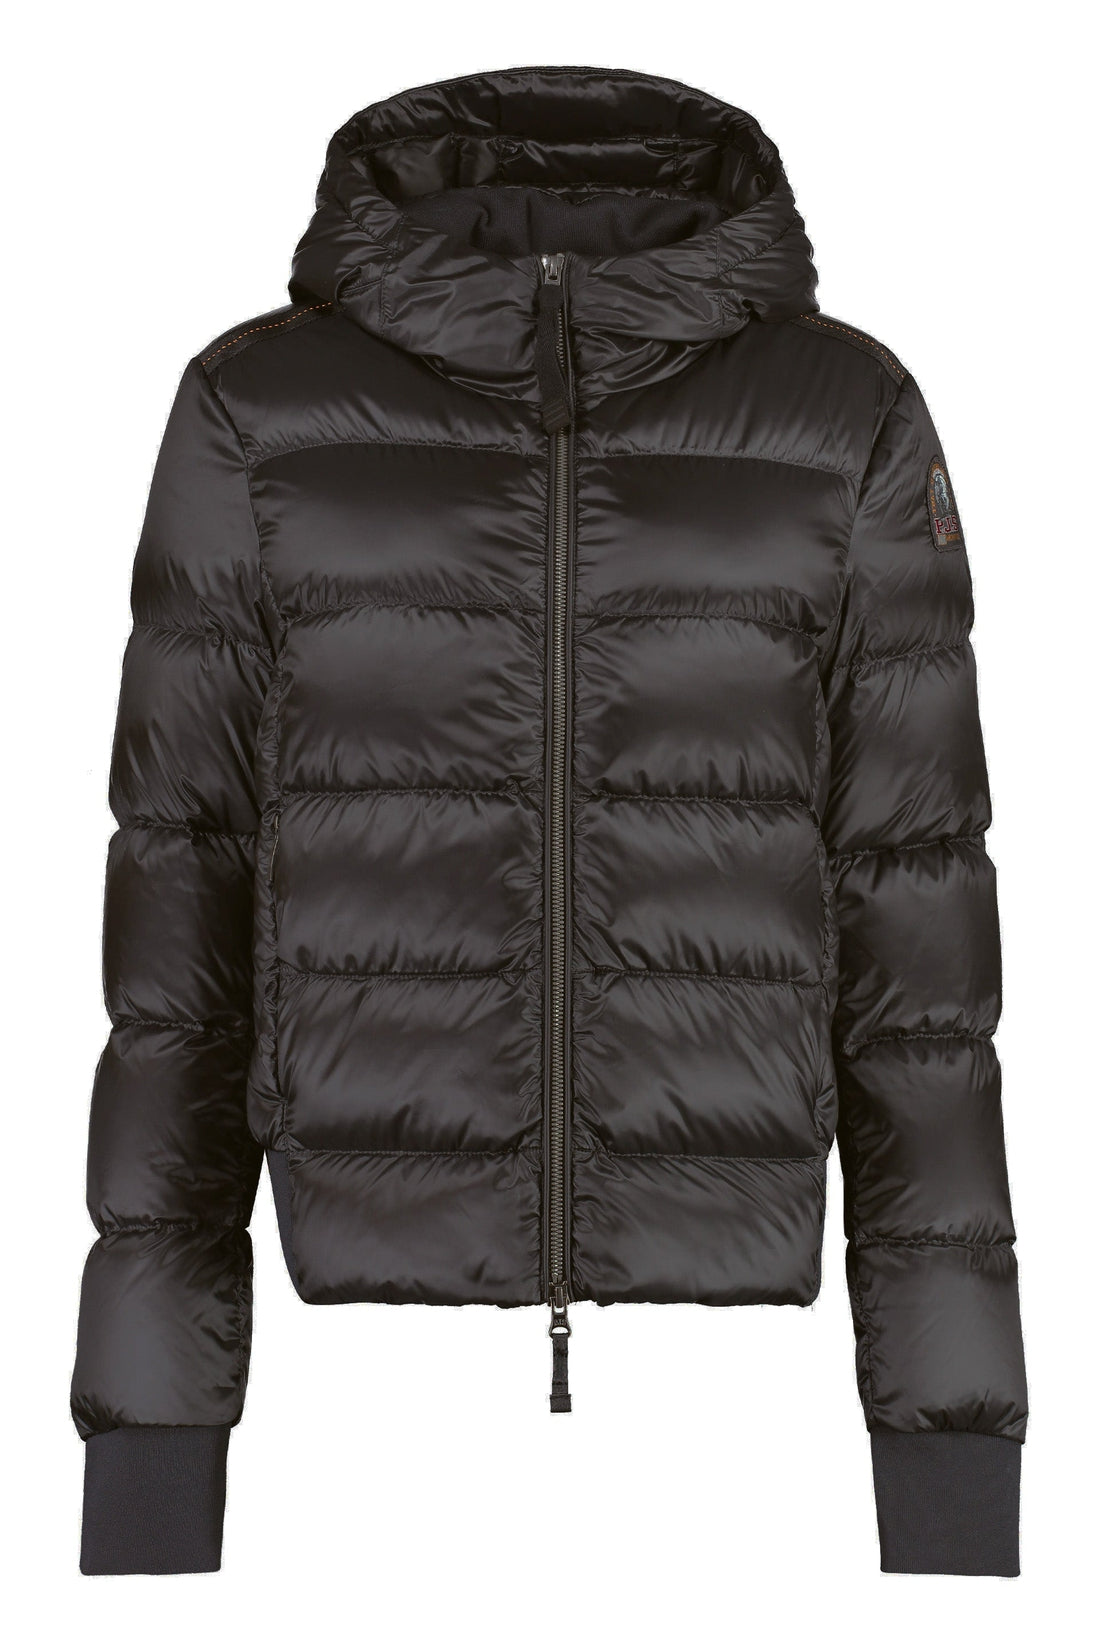 Parajumpers-OUTLET-SALE-Mariah hooded down jacket-ARCHIVIST